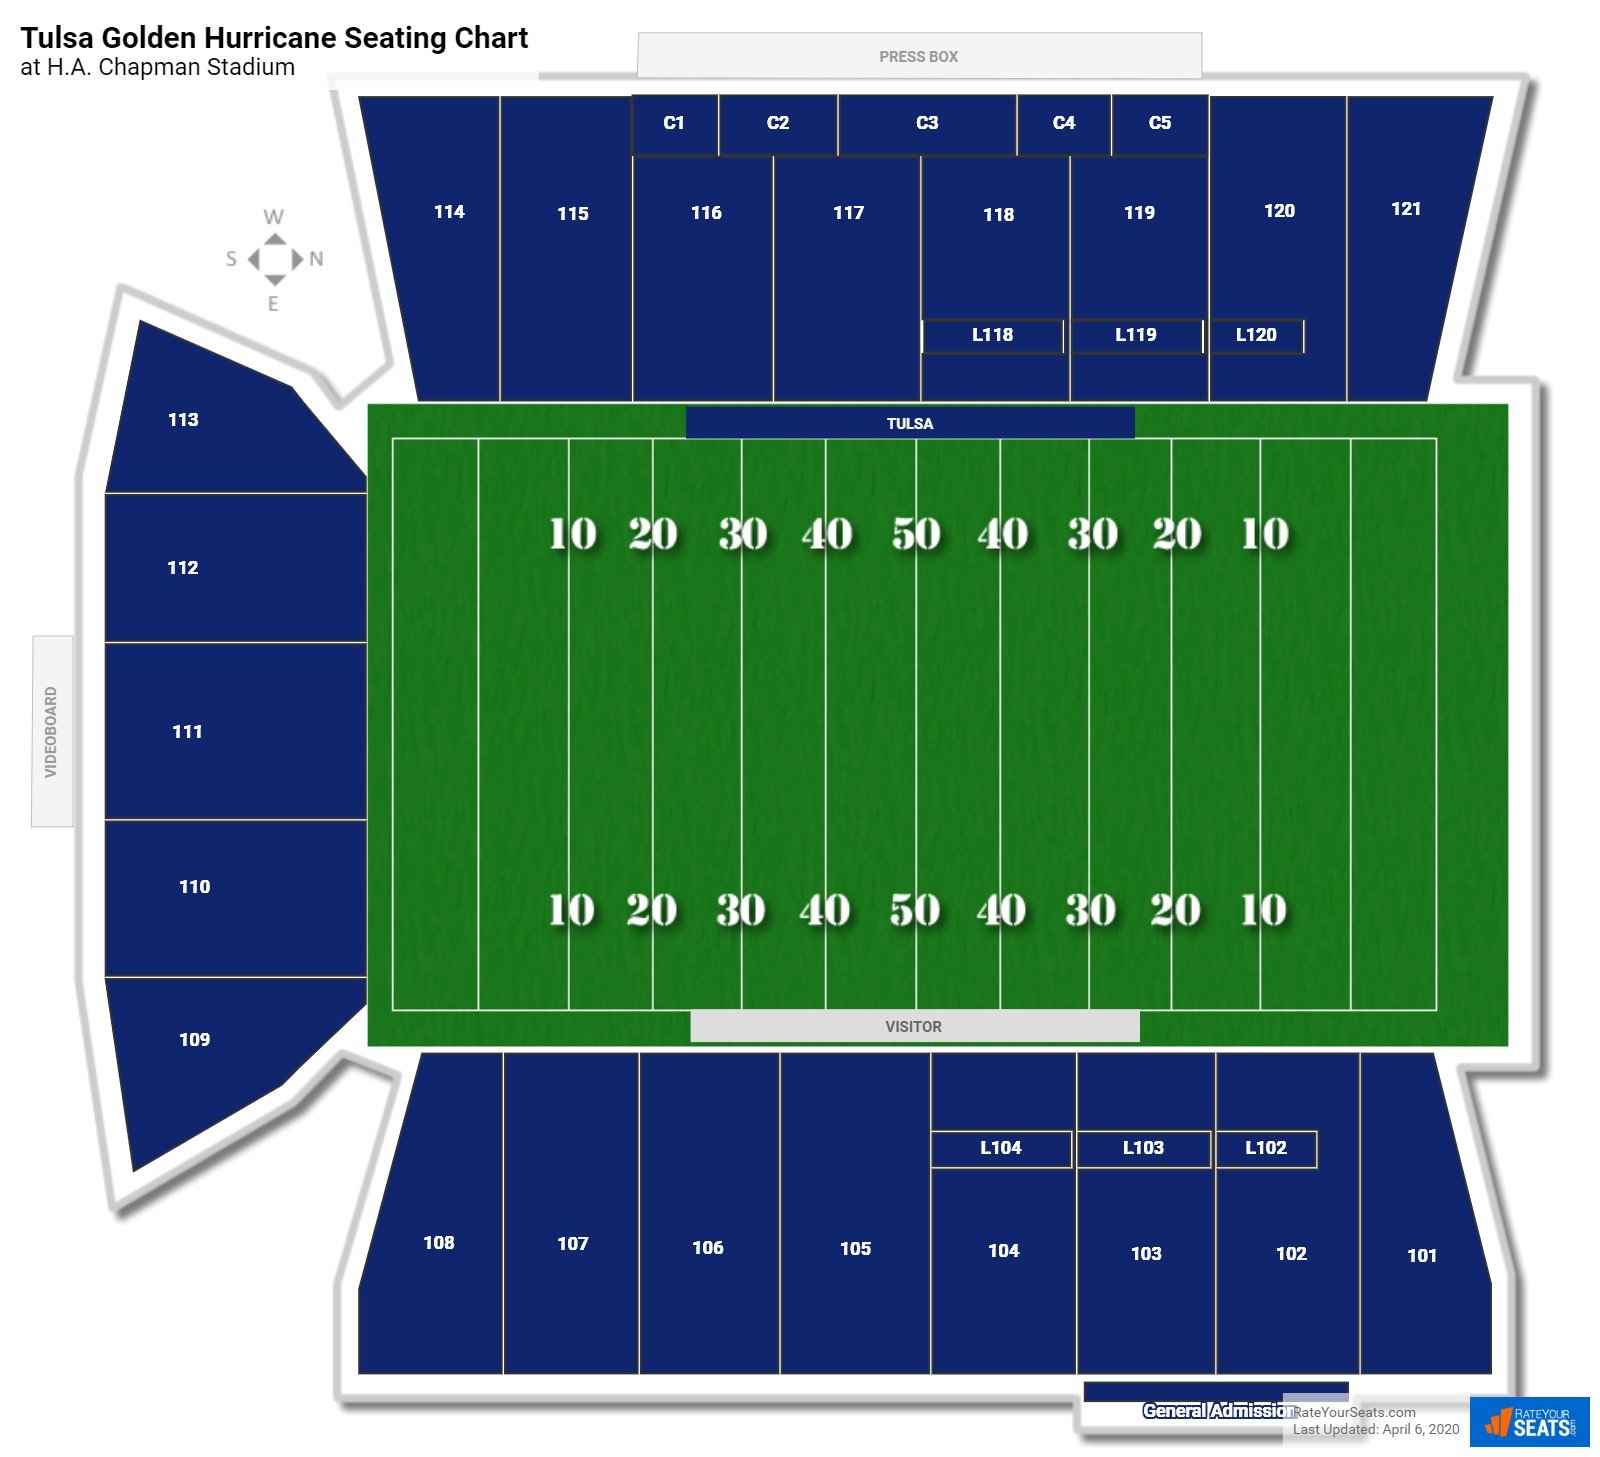 https://www.rateyourseats.com/assets/images/seating_charts/static/tulsa-golden-hurricane-seating-chart-at-h.a.-chapman-stadium.jpg